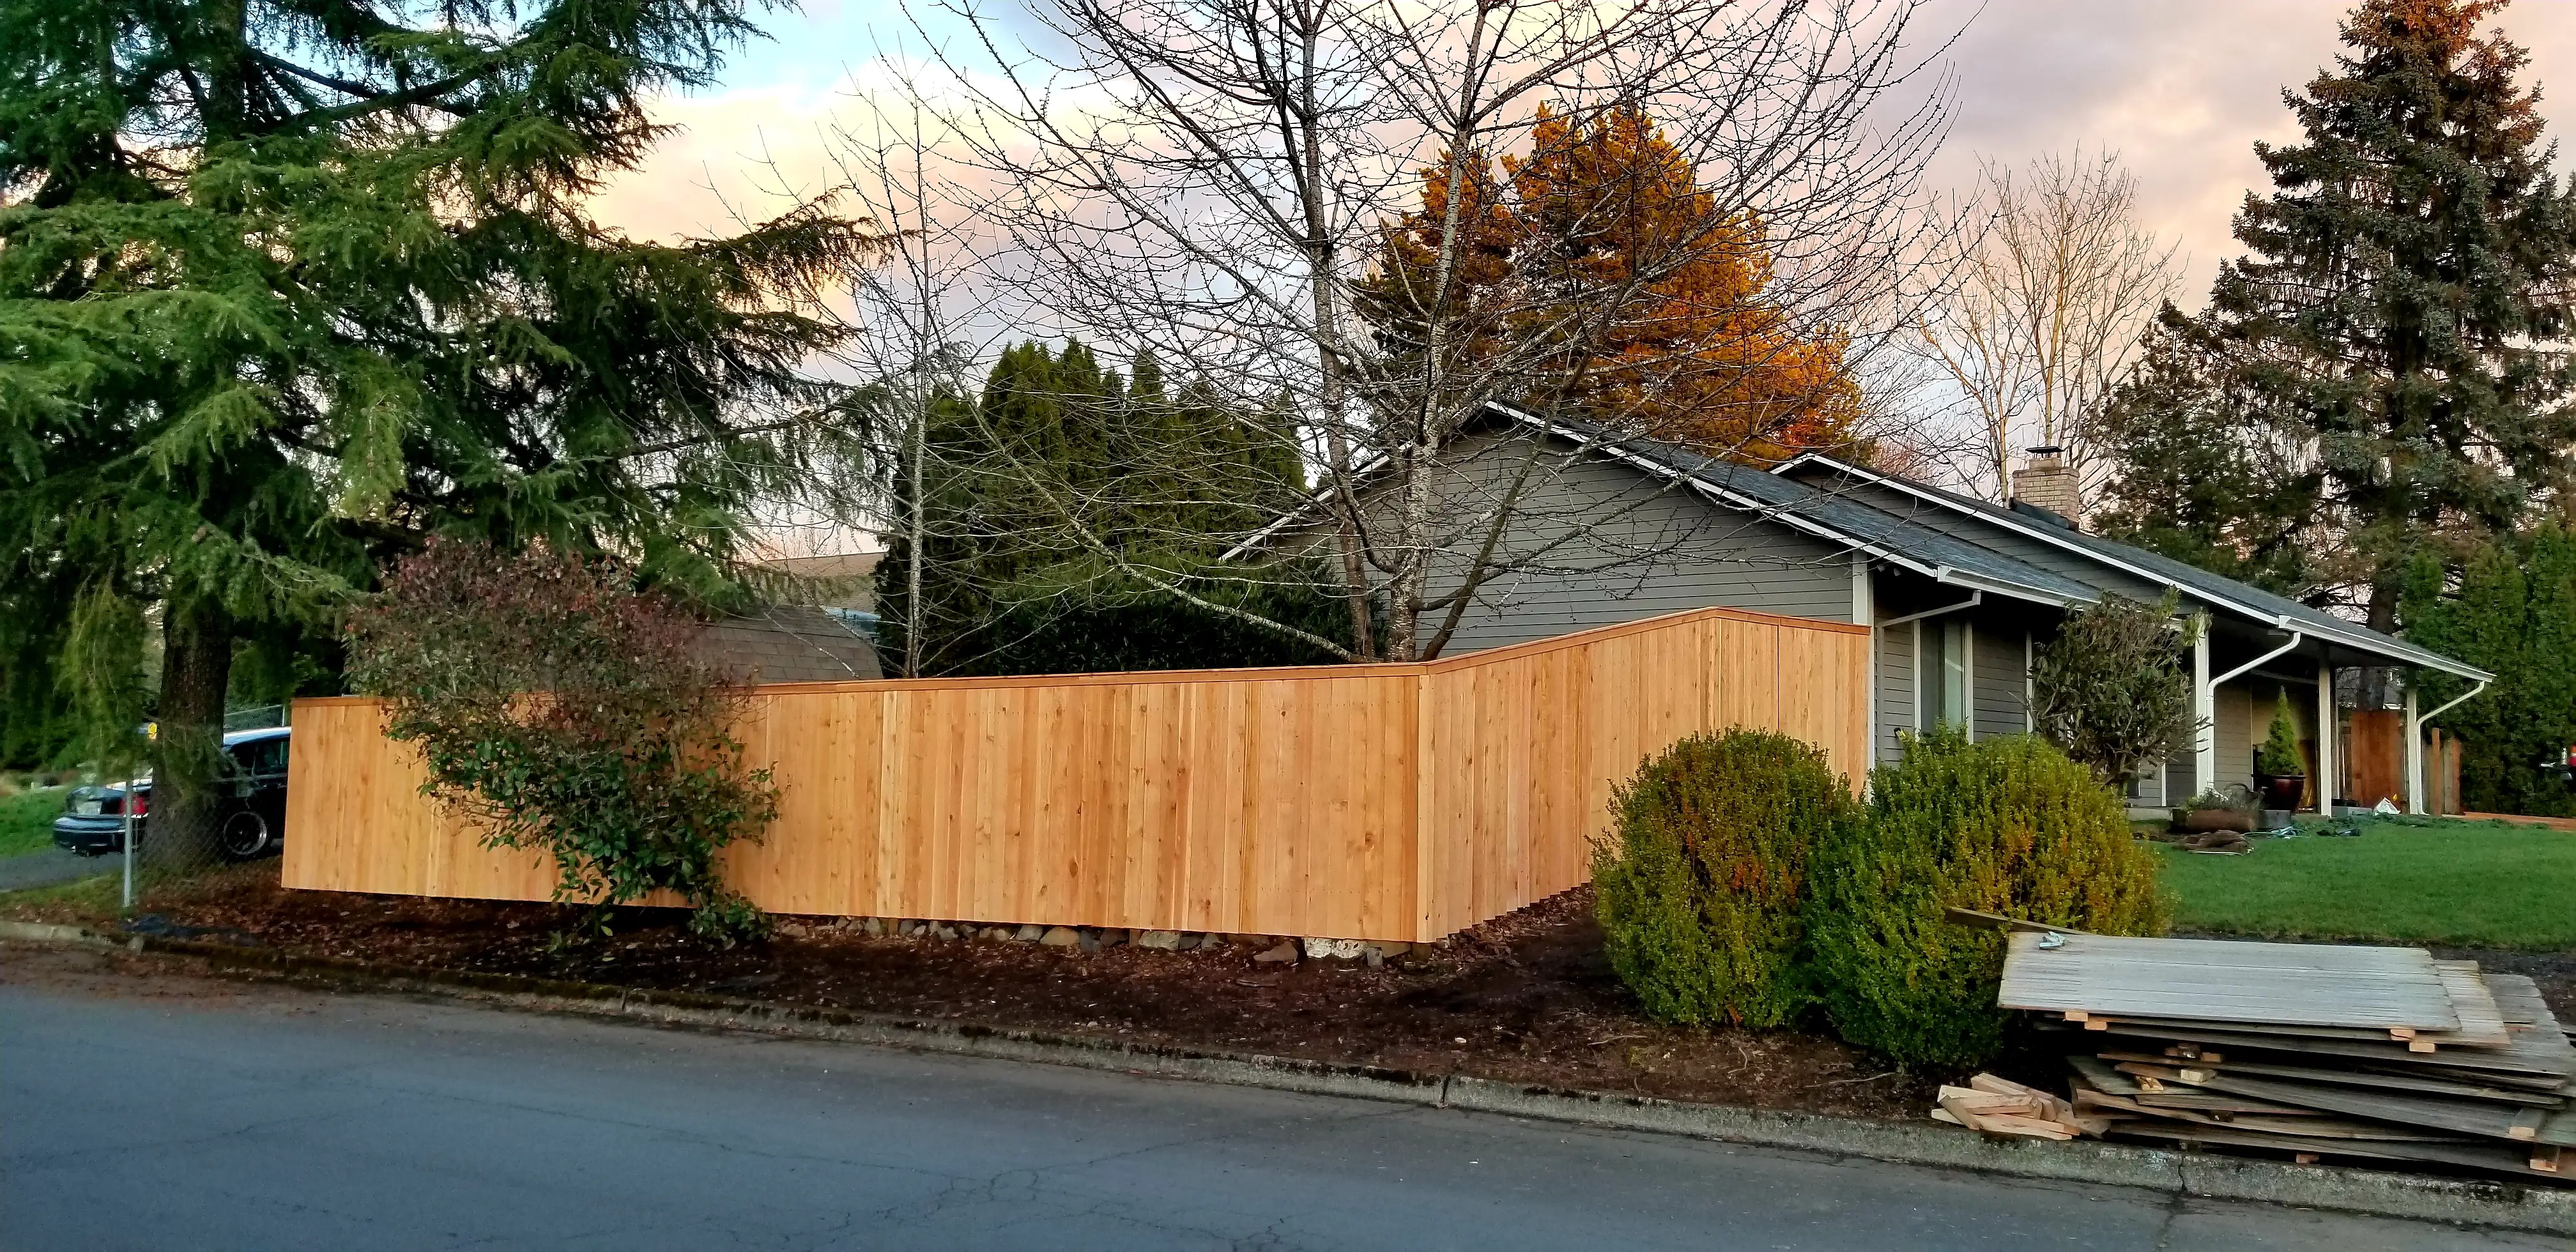 A very nice looking fence.